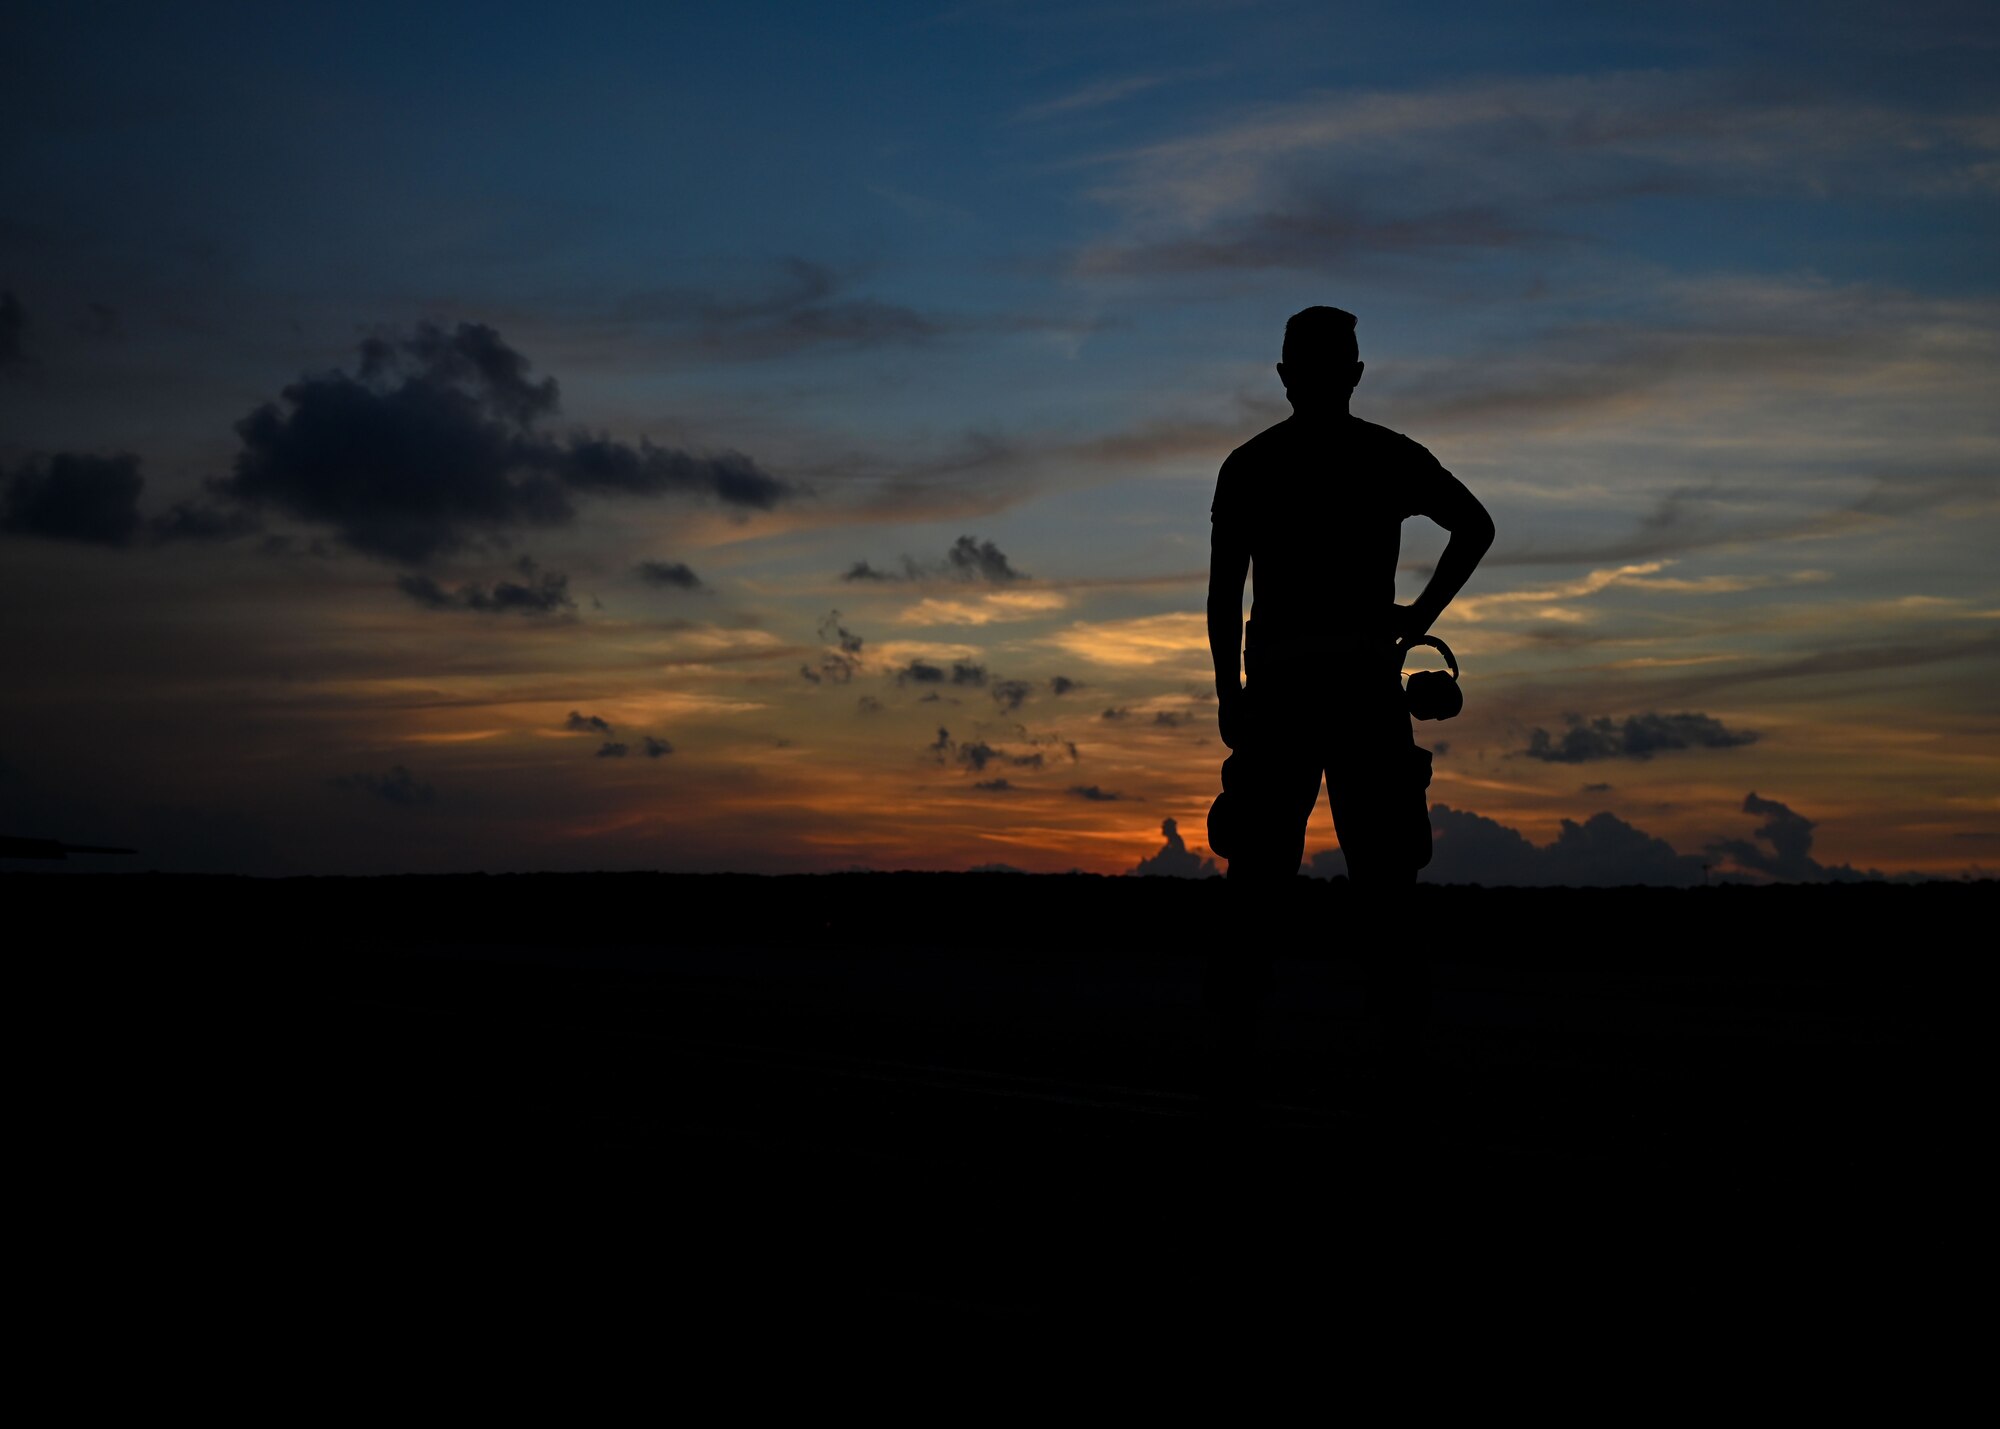 An Airman stands on the flightline.